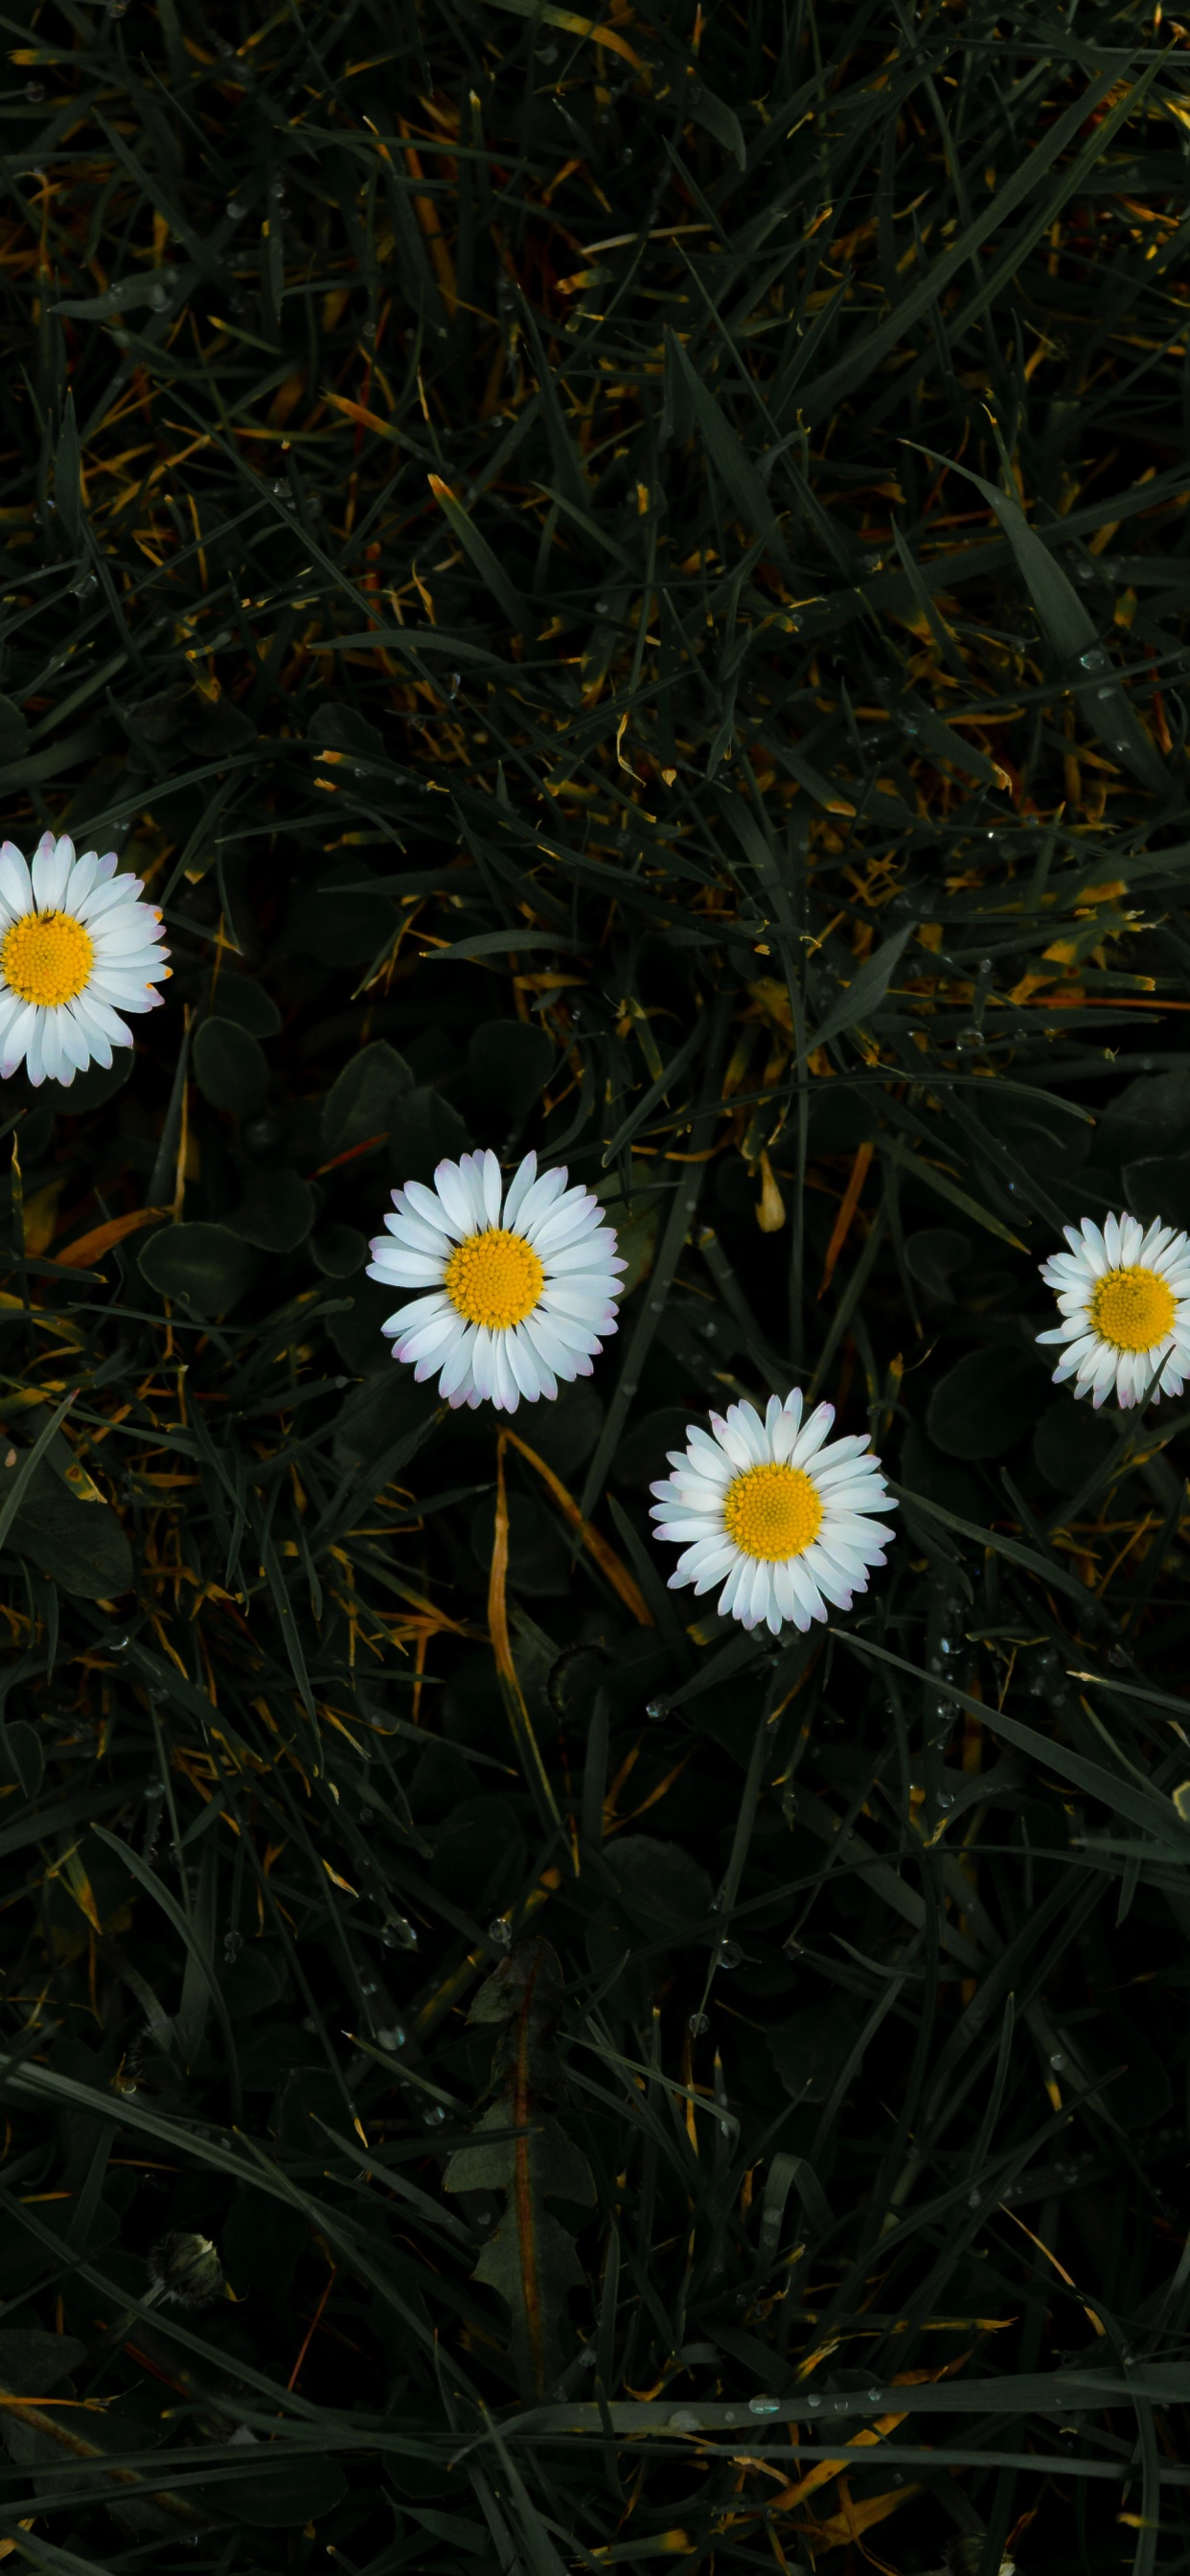 White Daisies in Bloom During Daytime. Wallpaper in 1242x2688 Resolution